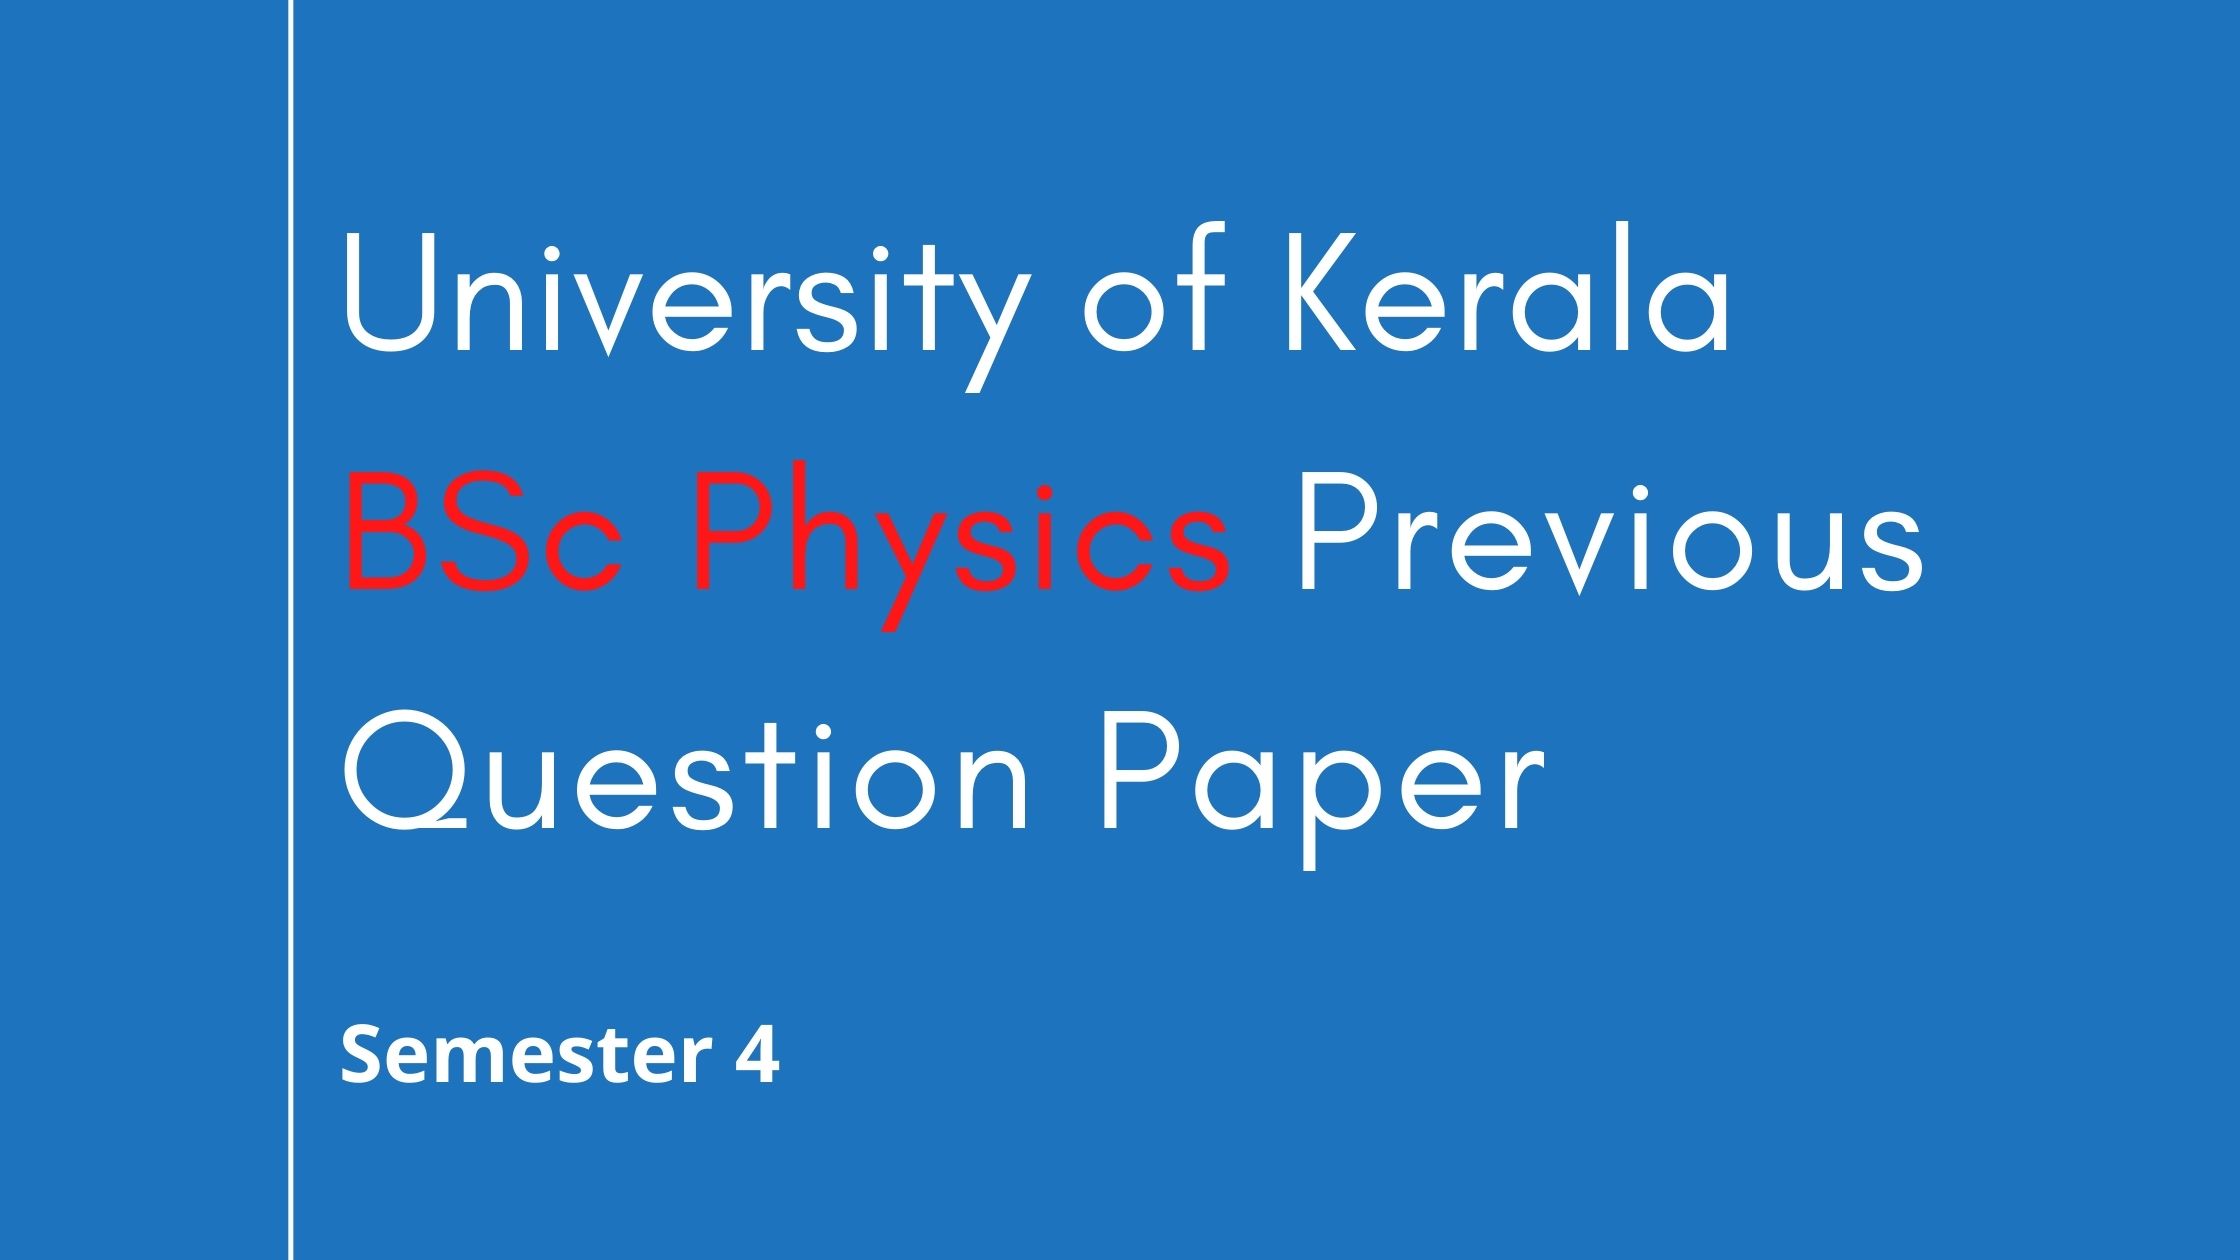 BSc Physics Fourth Semester Previous Year Question Papers of Kerala University